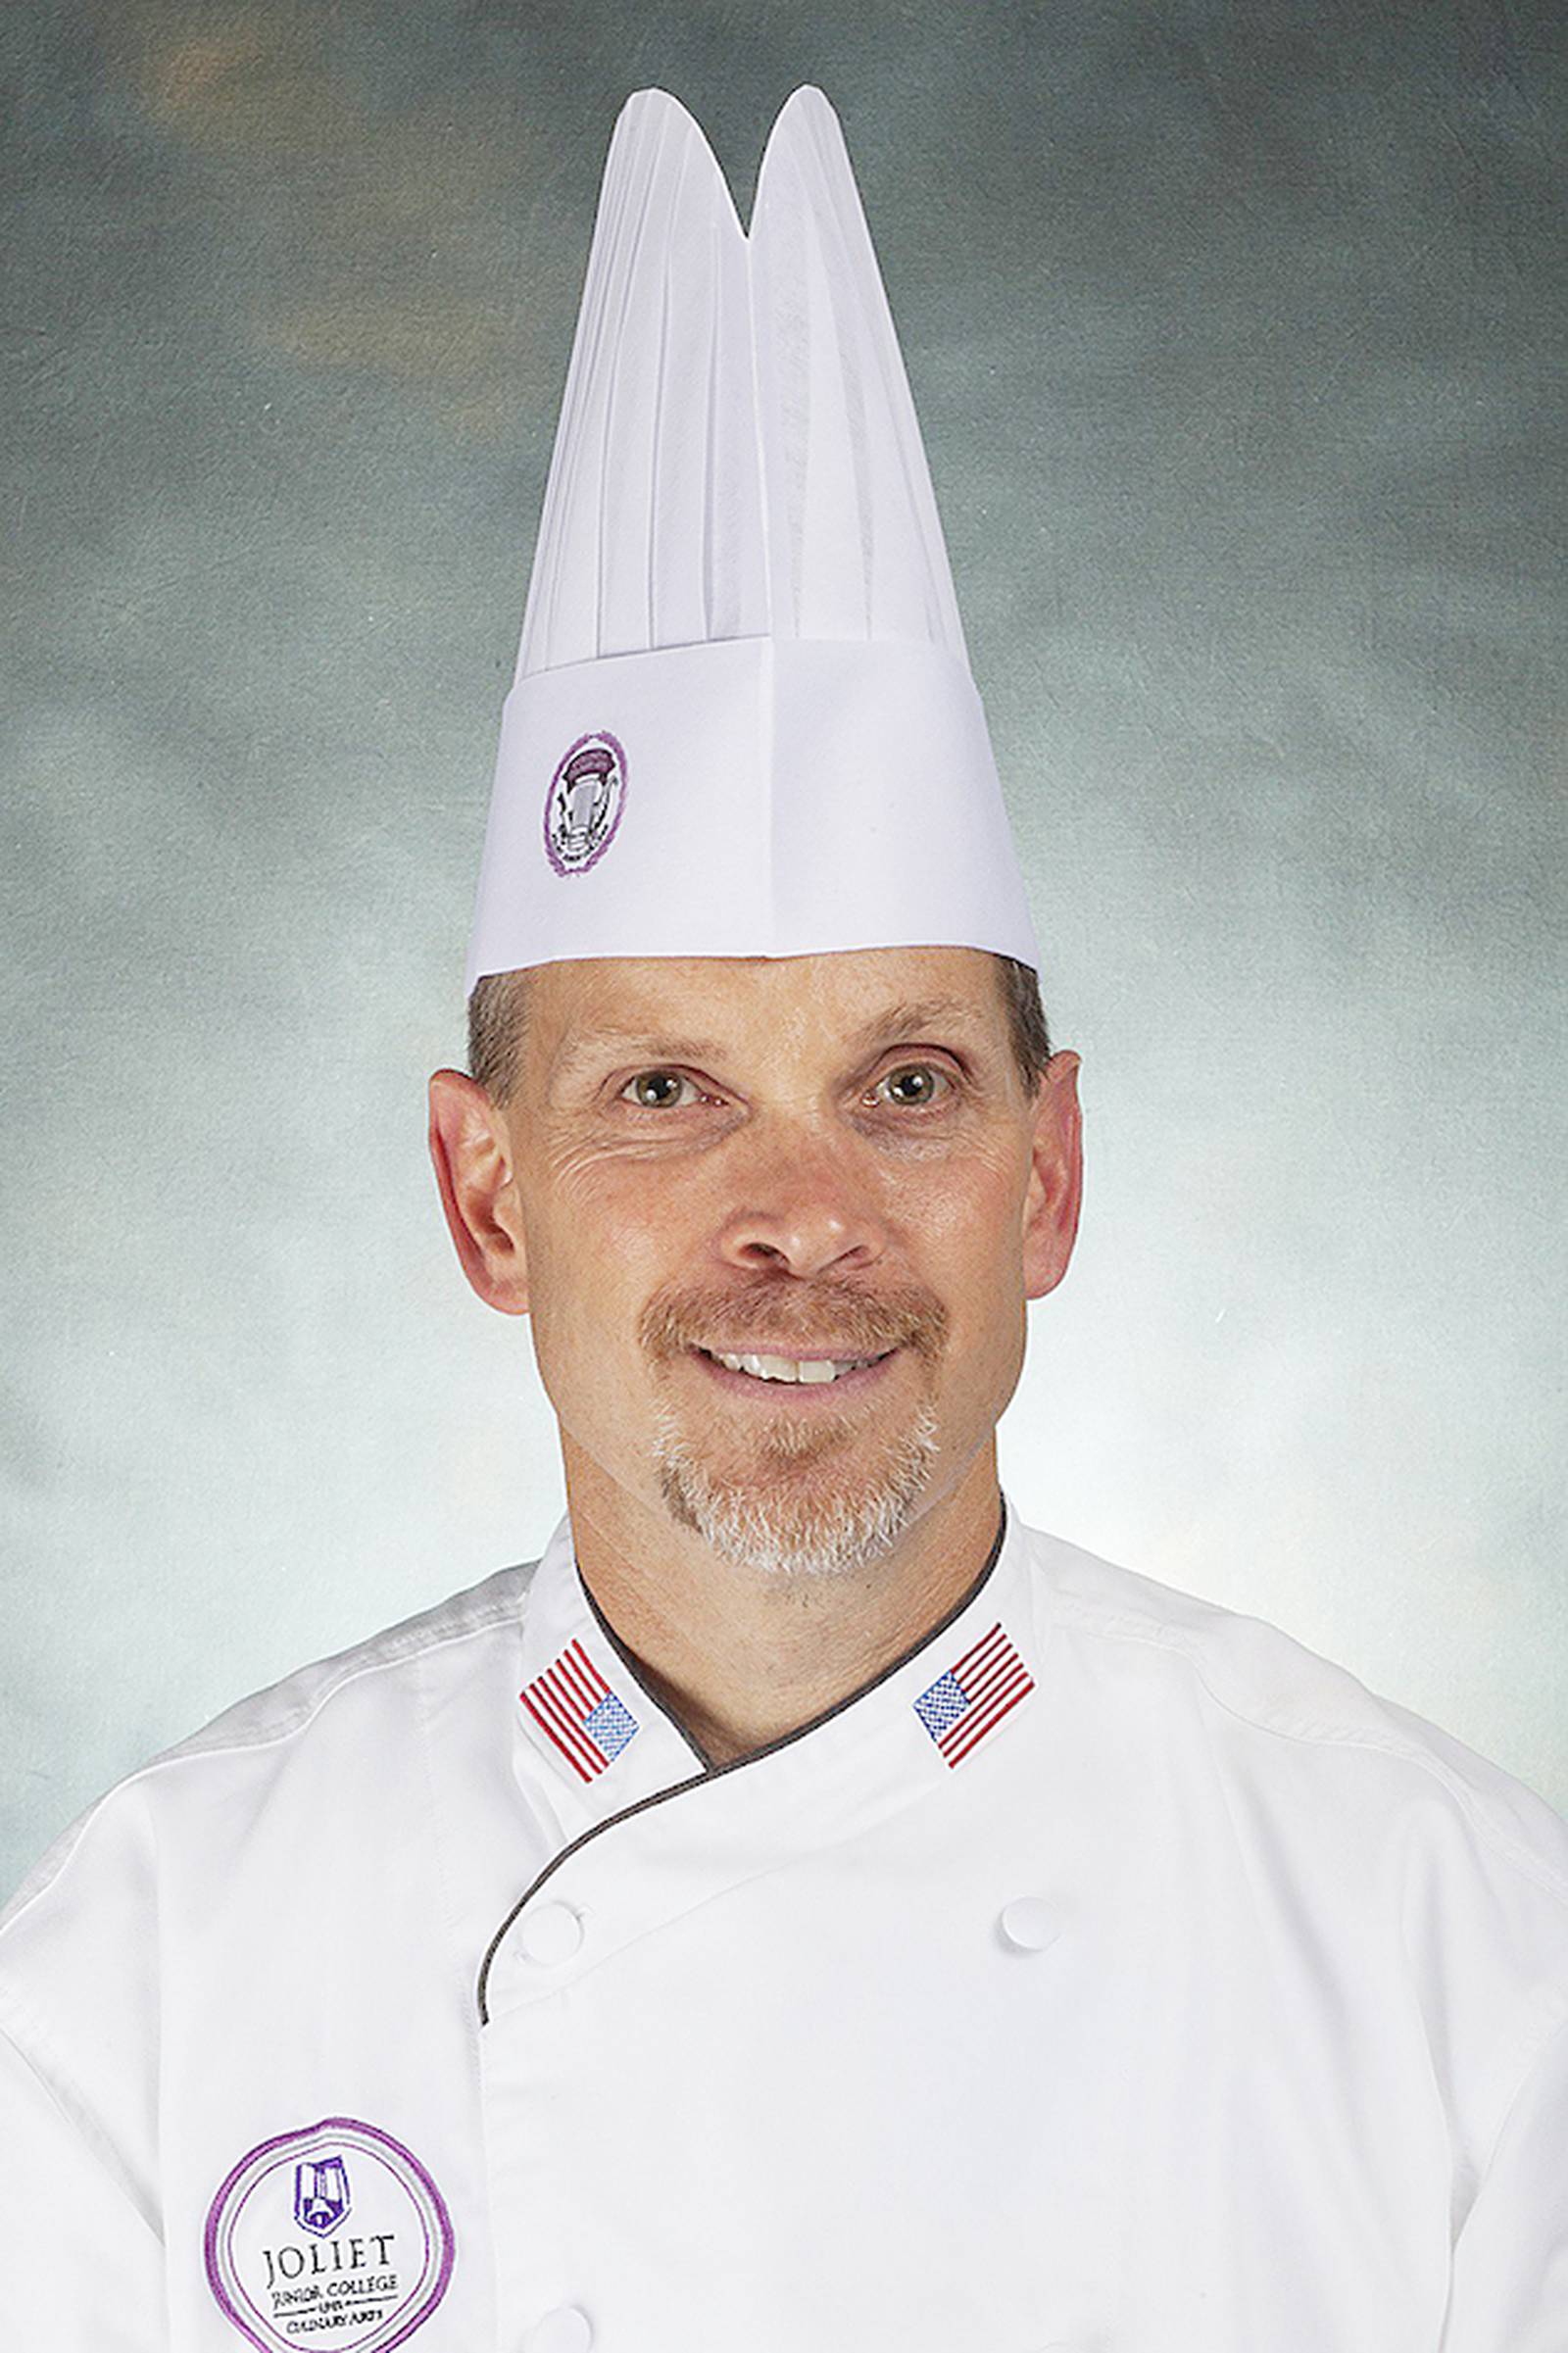 JJC instructor going for Master Chef certification Shaw Local